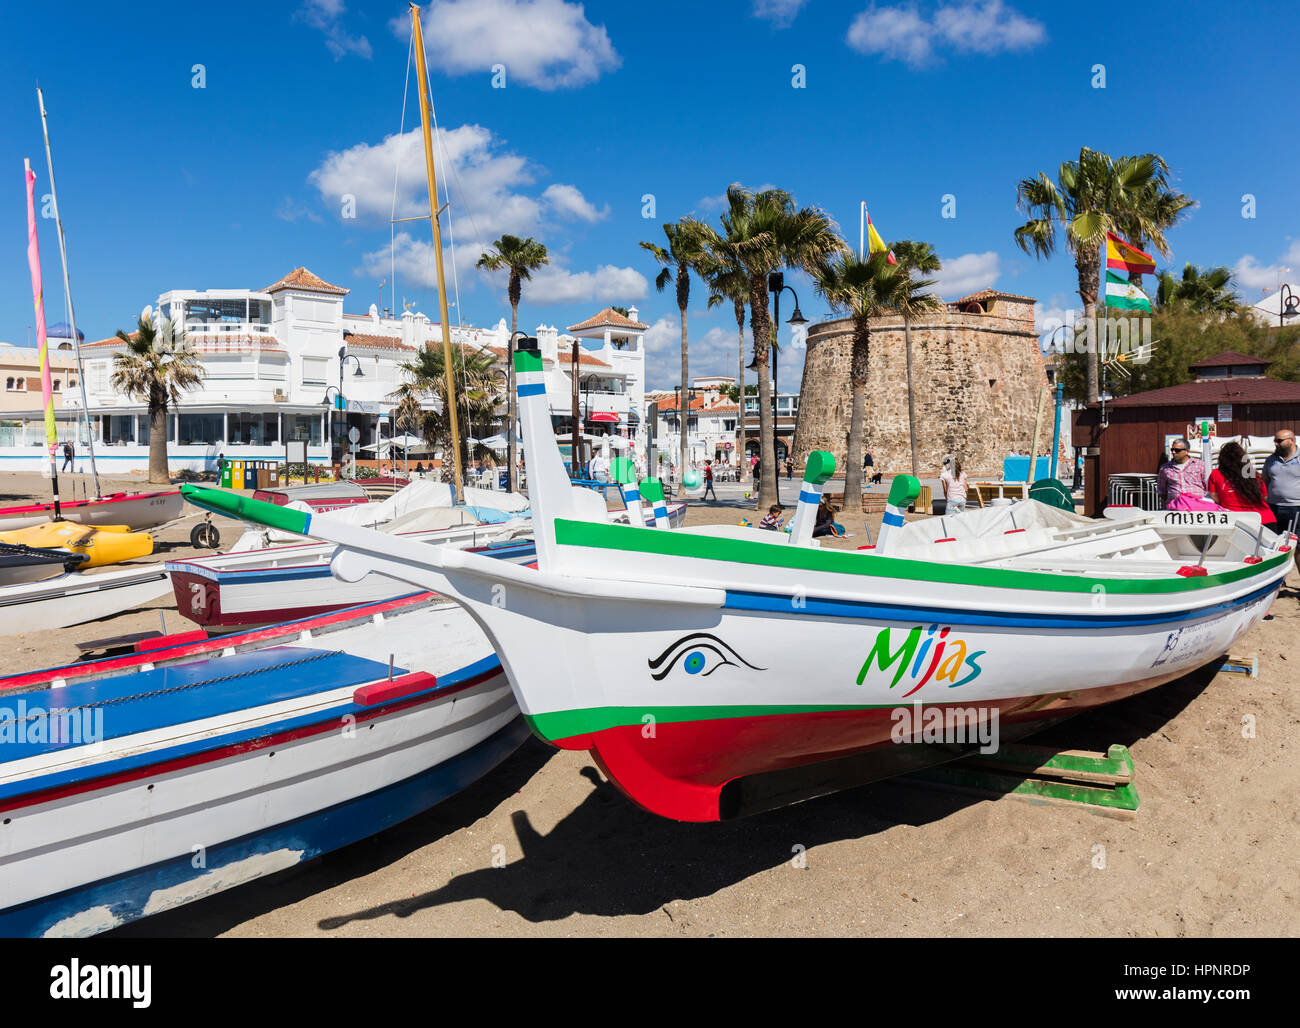 La Cala de Mijas, Costa del Sol, Malaga Province, Andalusia, southern Spain.  A traditional fishing boat known as a jabega.  These days it is mostly b Stock Photo